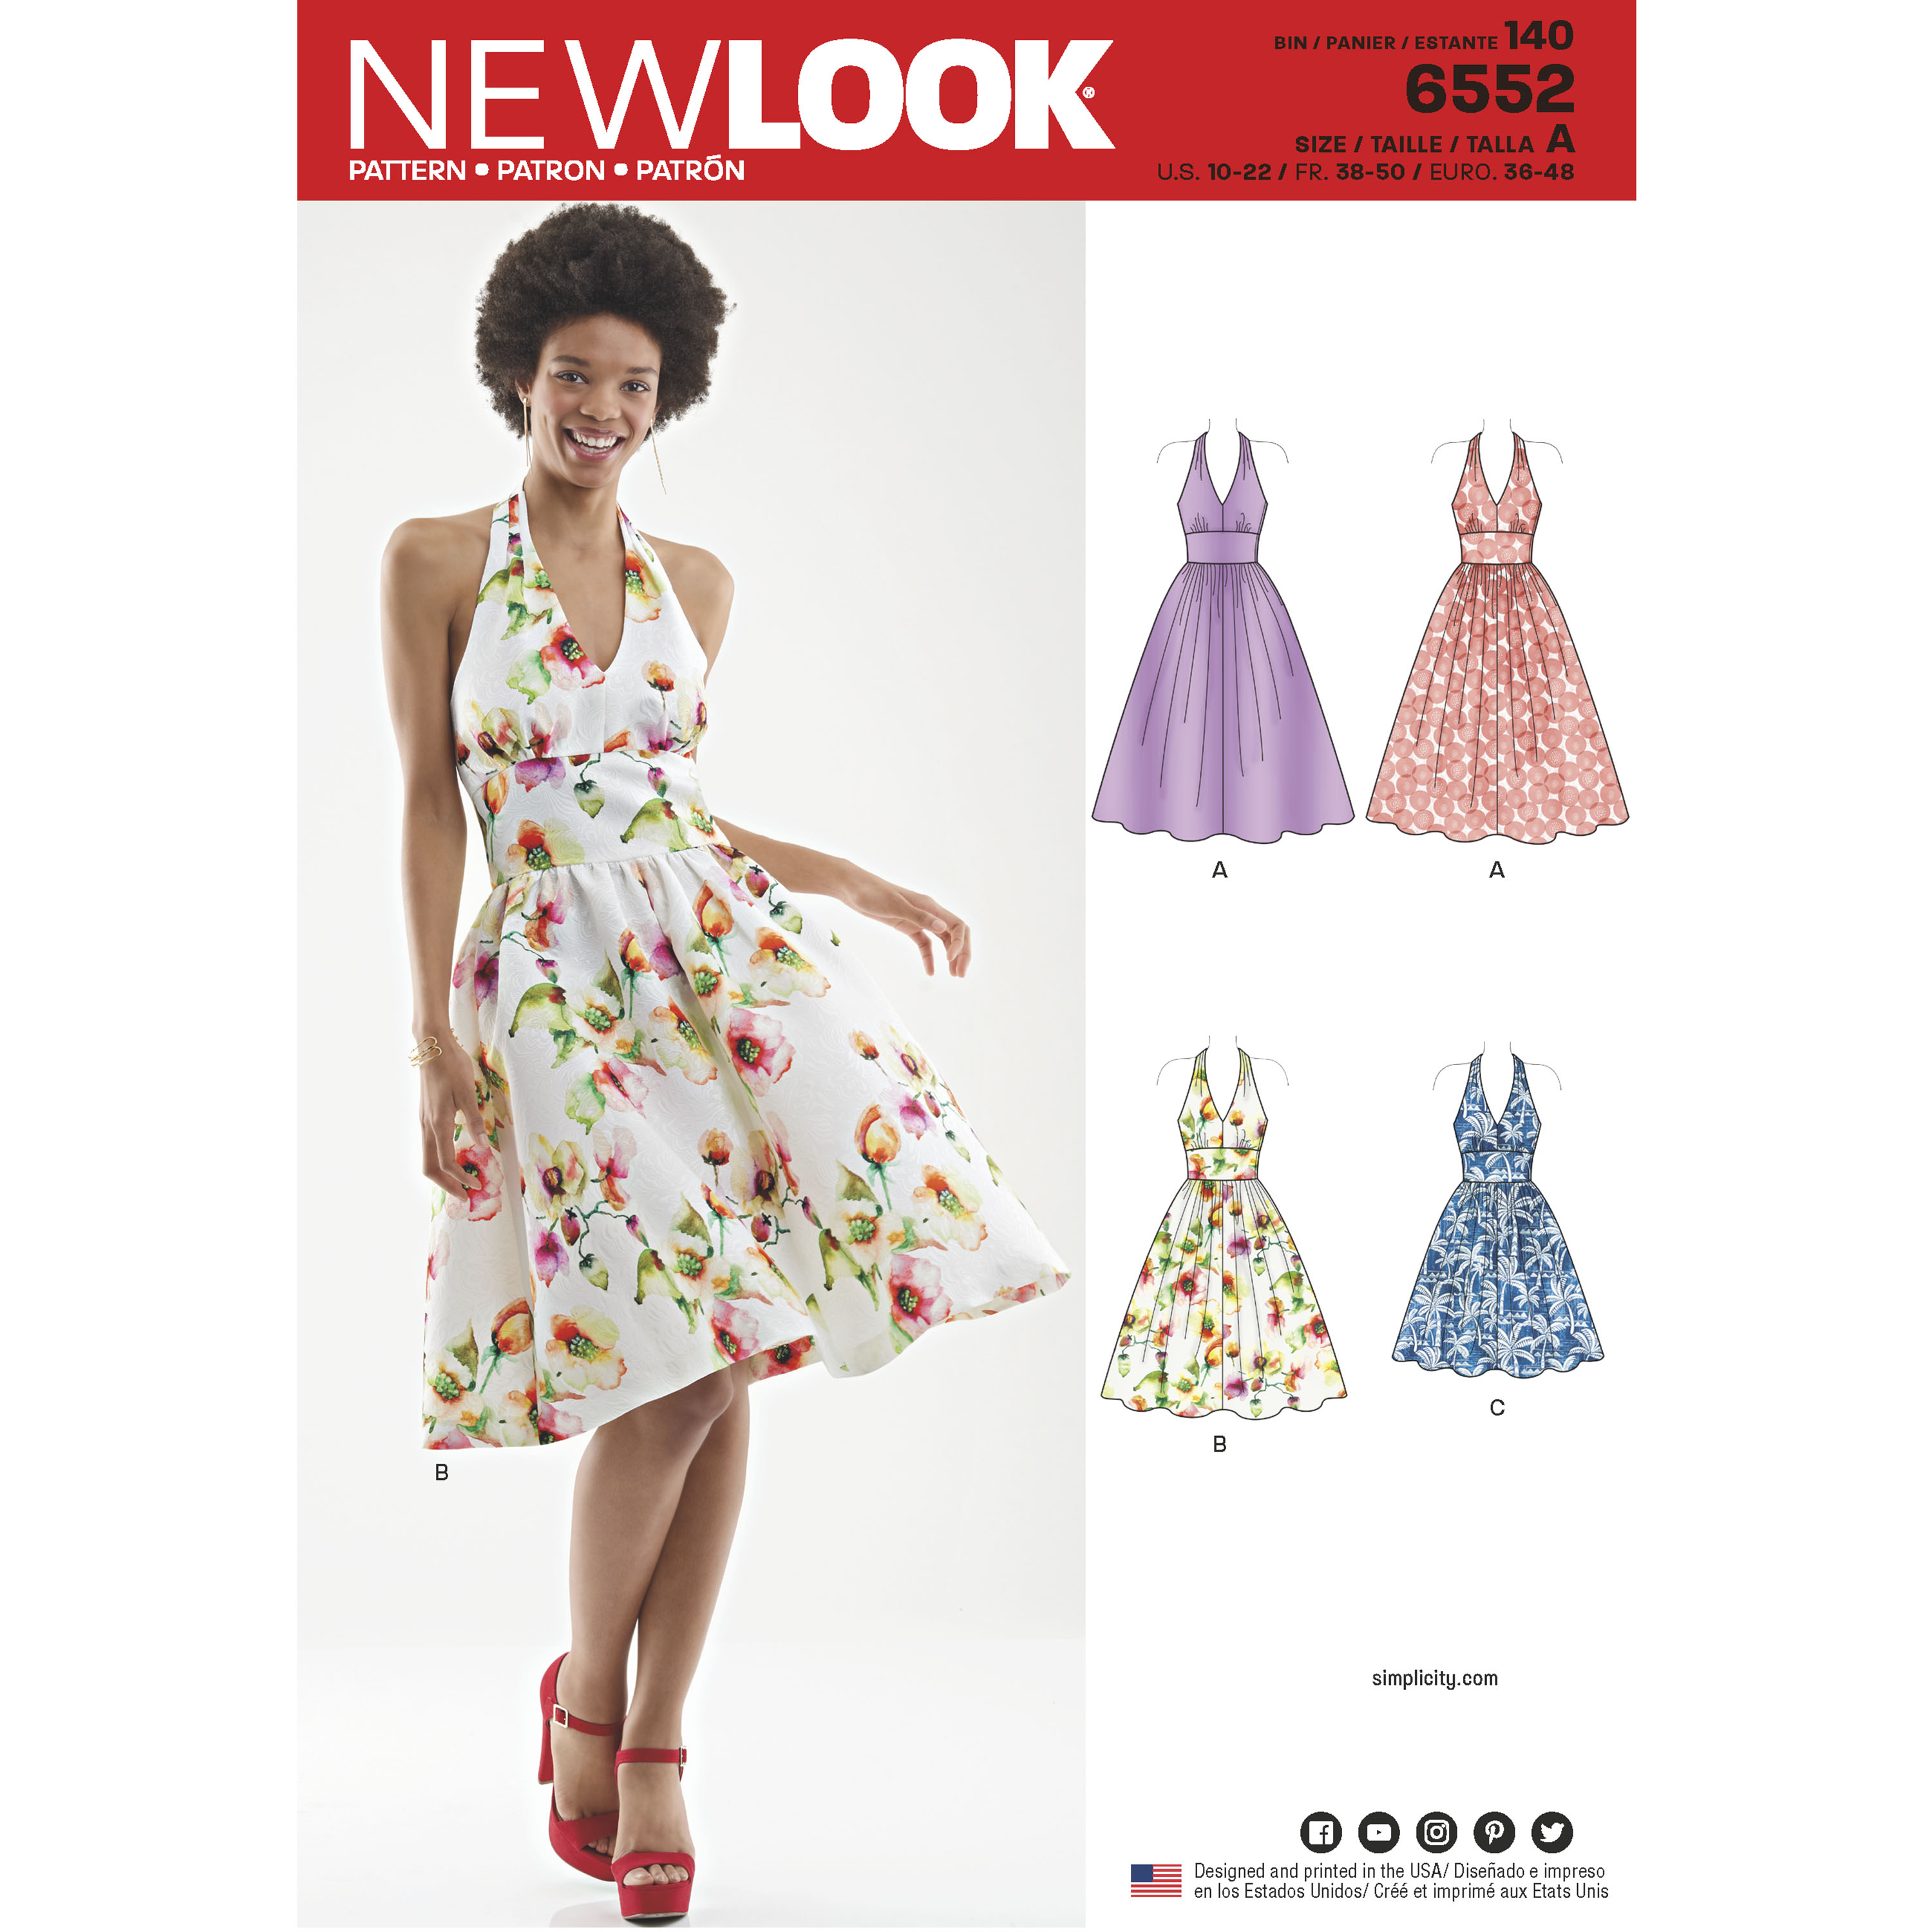 https://images.patternreview.com/sewing/patterns/newlook/2018/6552/6552.jpg